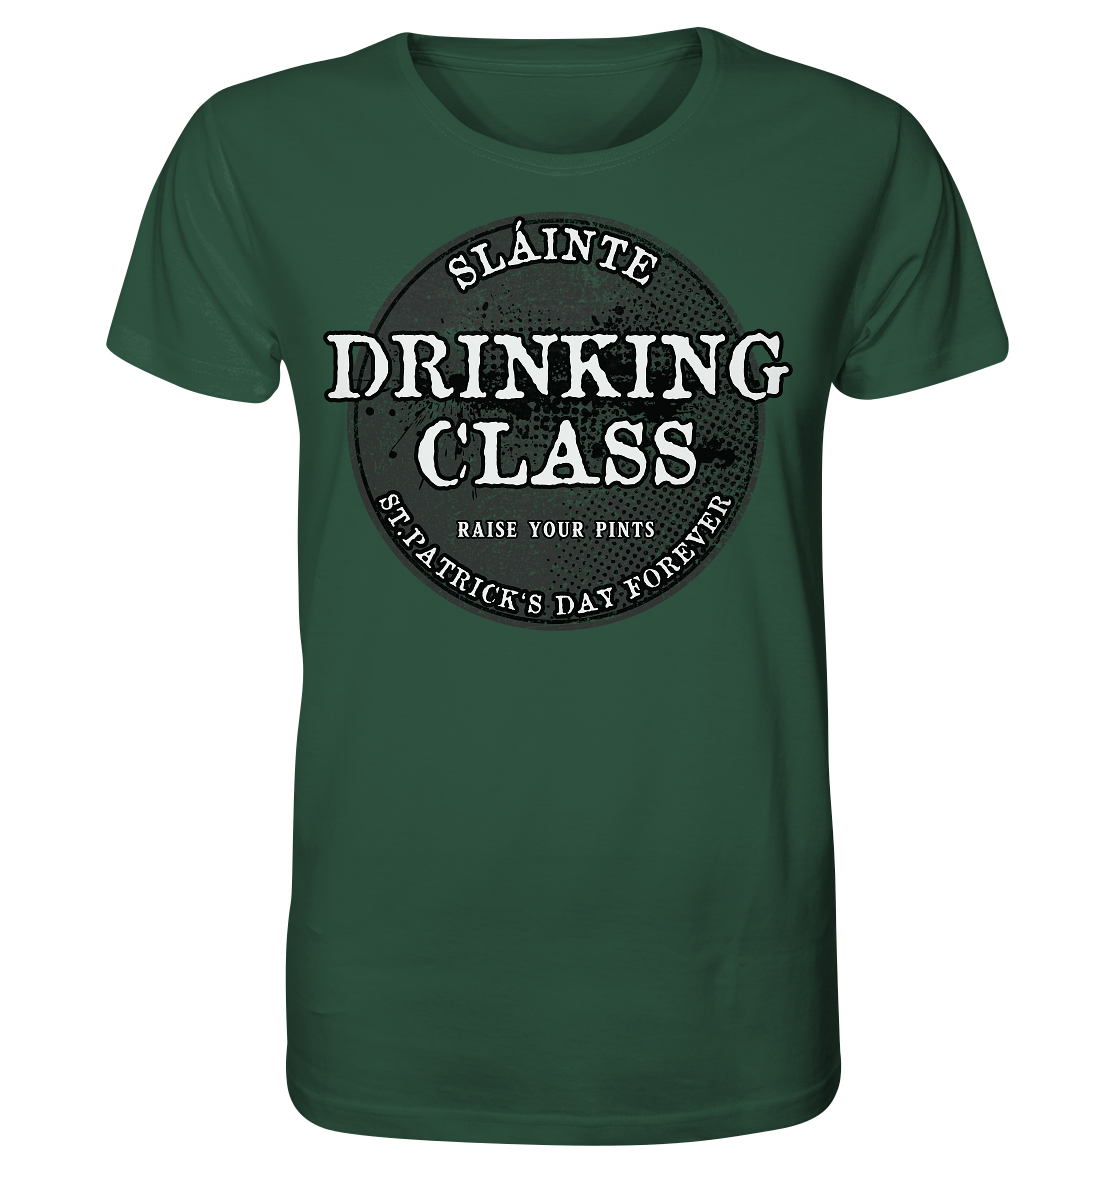 Drinking Class "St.Patrick's Day Forever" - Organic Shirt